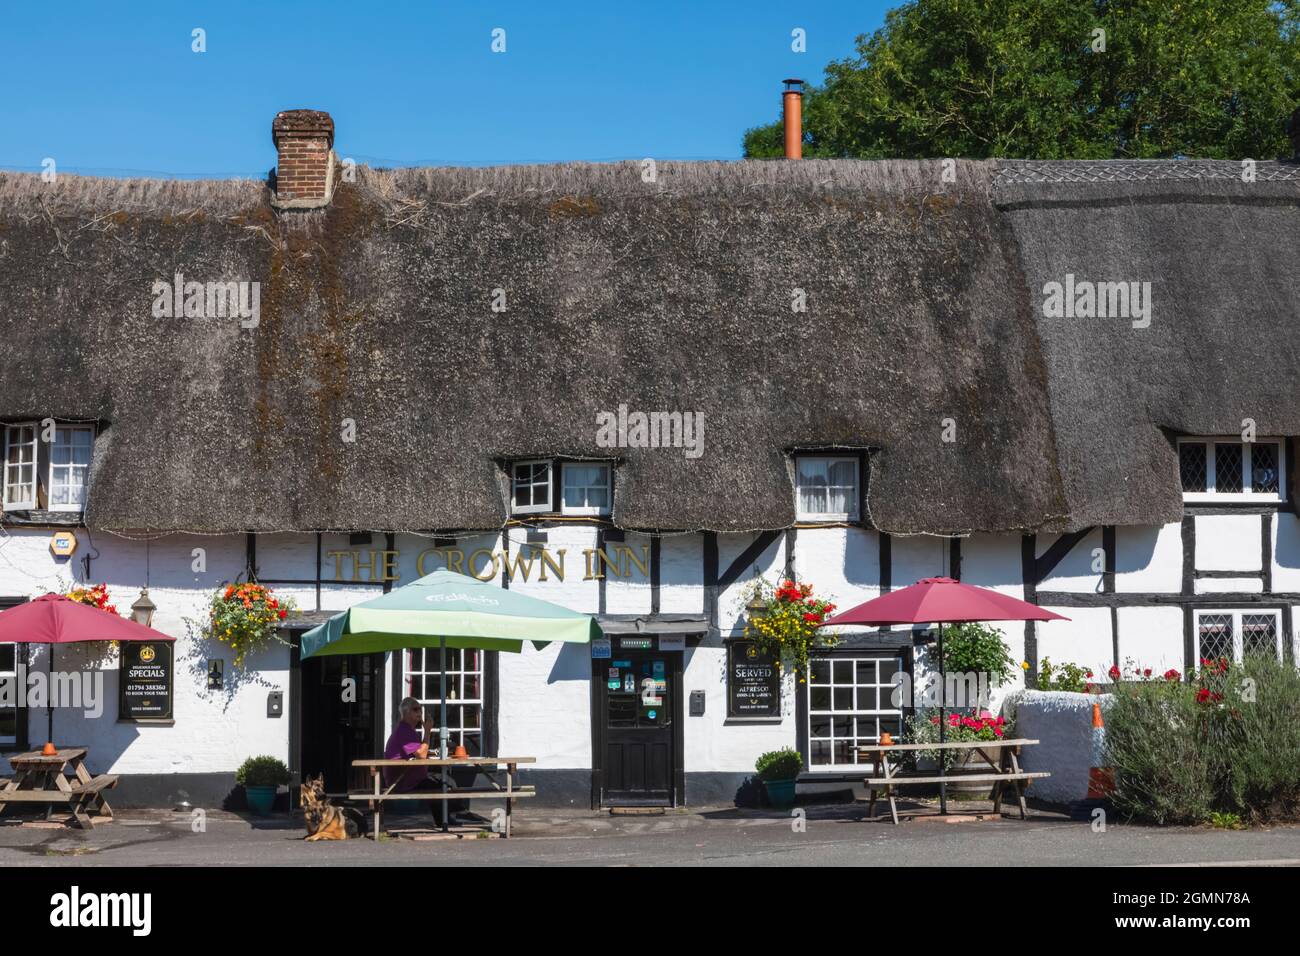 England, Hampshire, Test Valley, Stockbridge, King's Somborne, The Crown Inn Traditional Thatched Country Pub Stock Photo